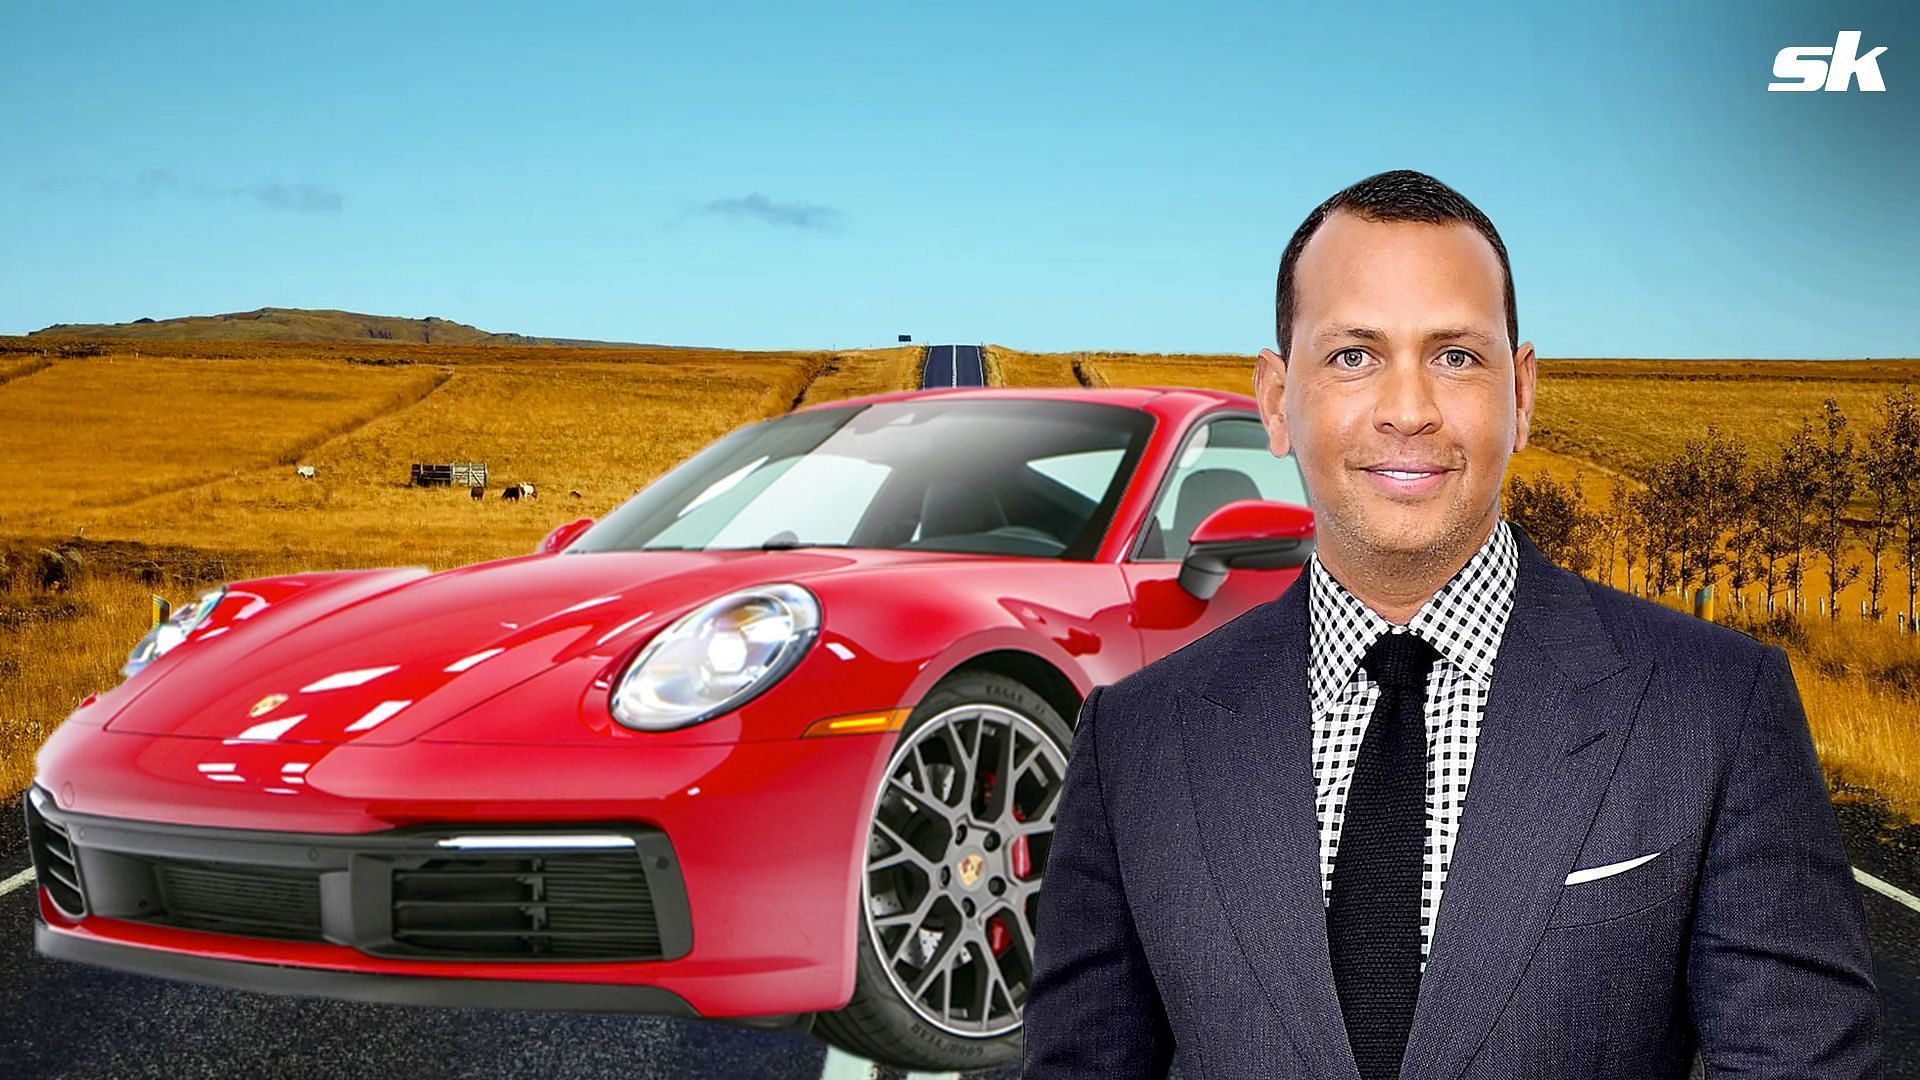 Alex Rodriguez appears to be cruising in Porsche he purchased for Jennifer Lopez